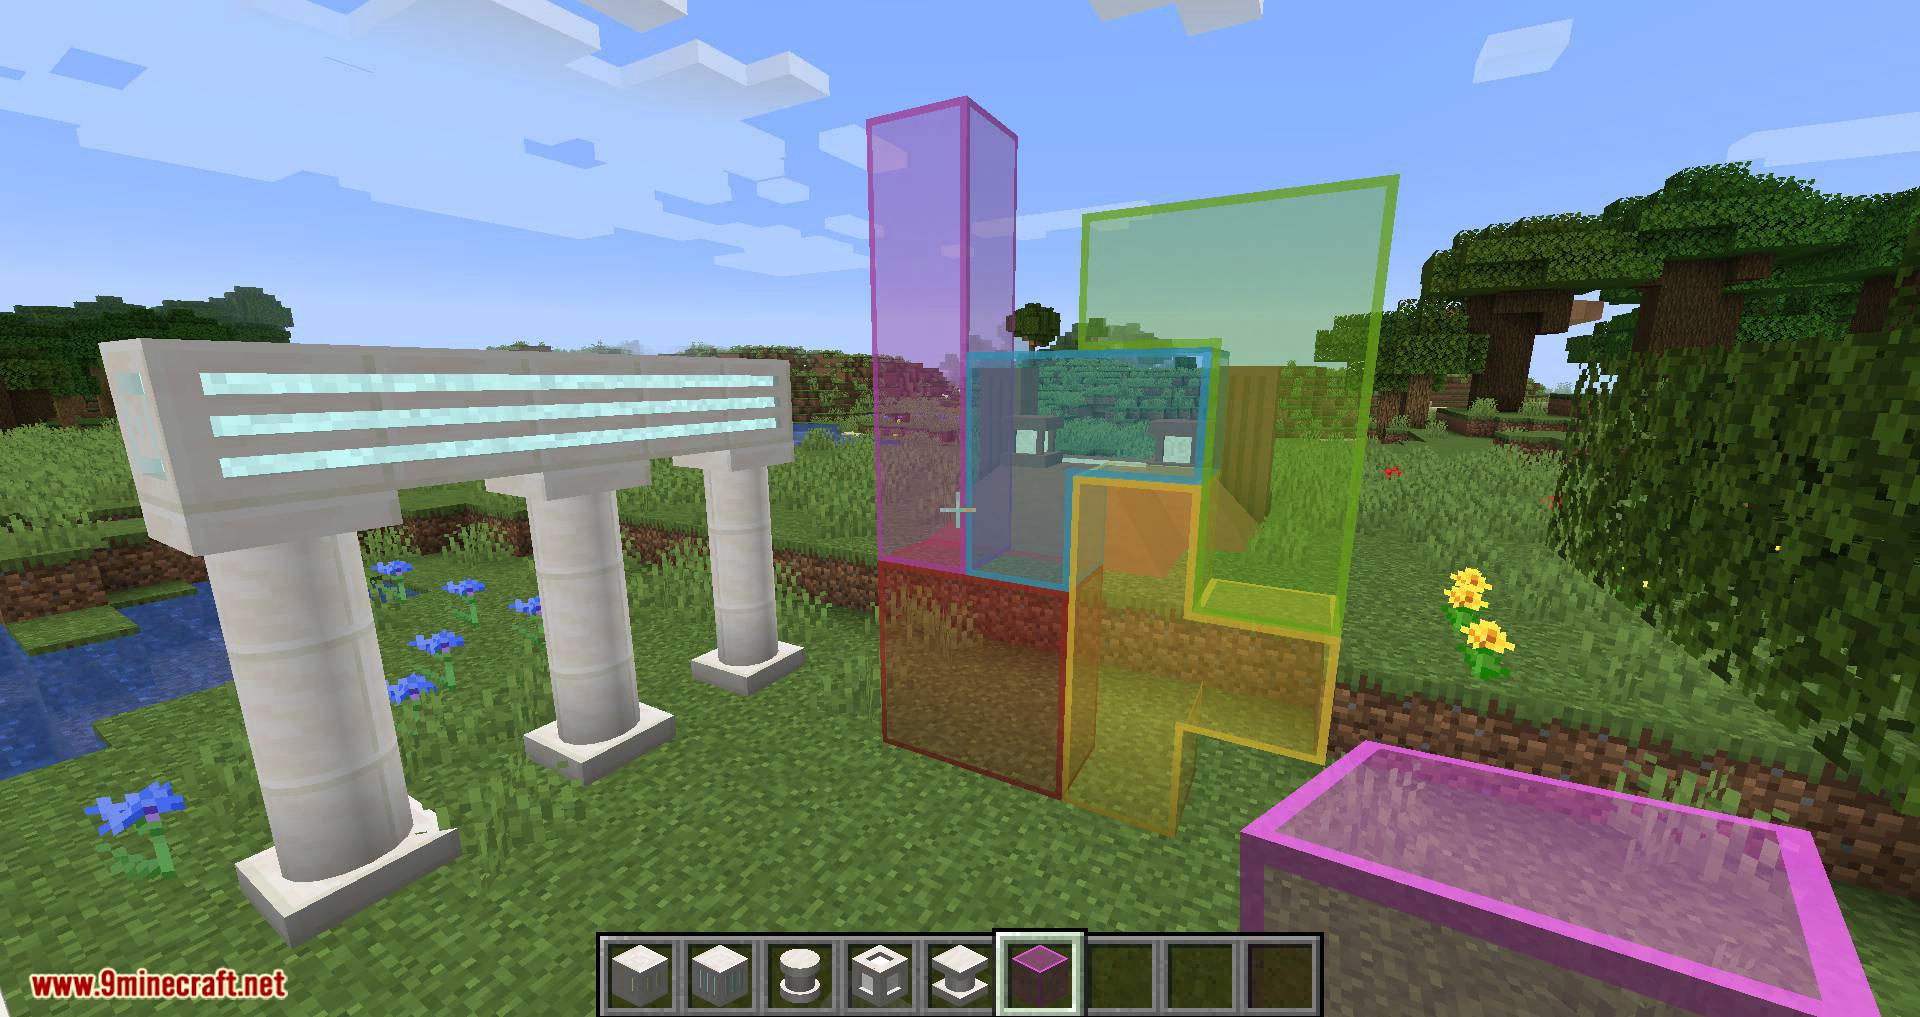 Now blocks. Minecraft connection of Blocks. Exotic Mod. All in one [Modded one Block]. Ll in one [Modded one Block].